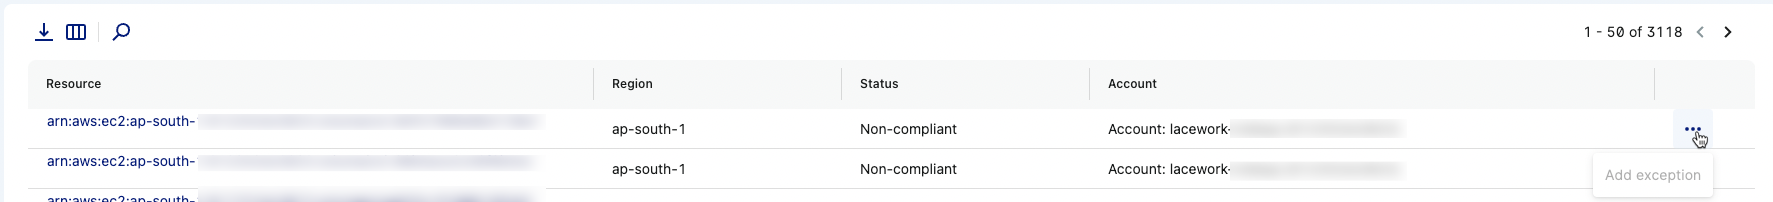 console-cloud-compliance-policy-drawer-add_exception.png